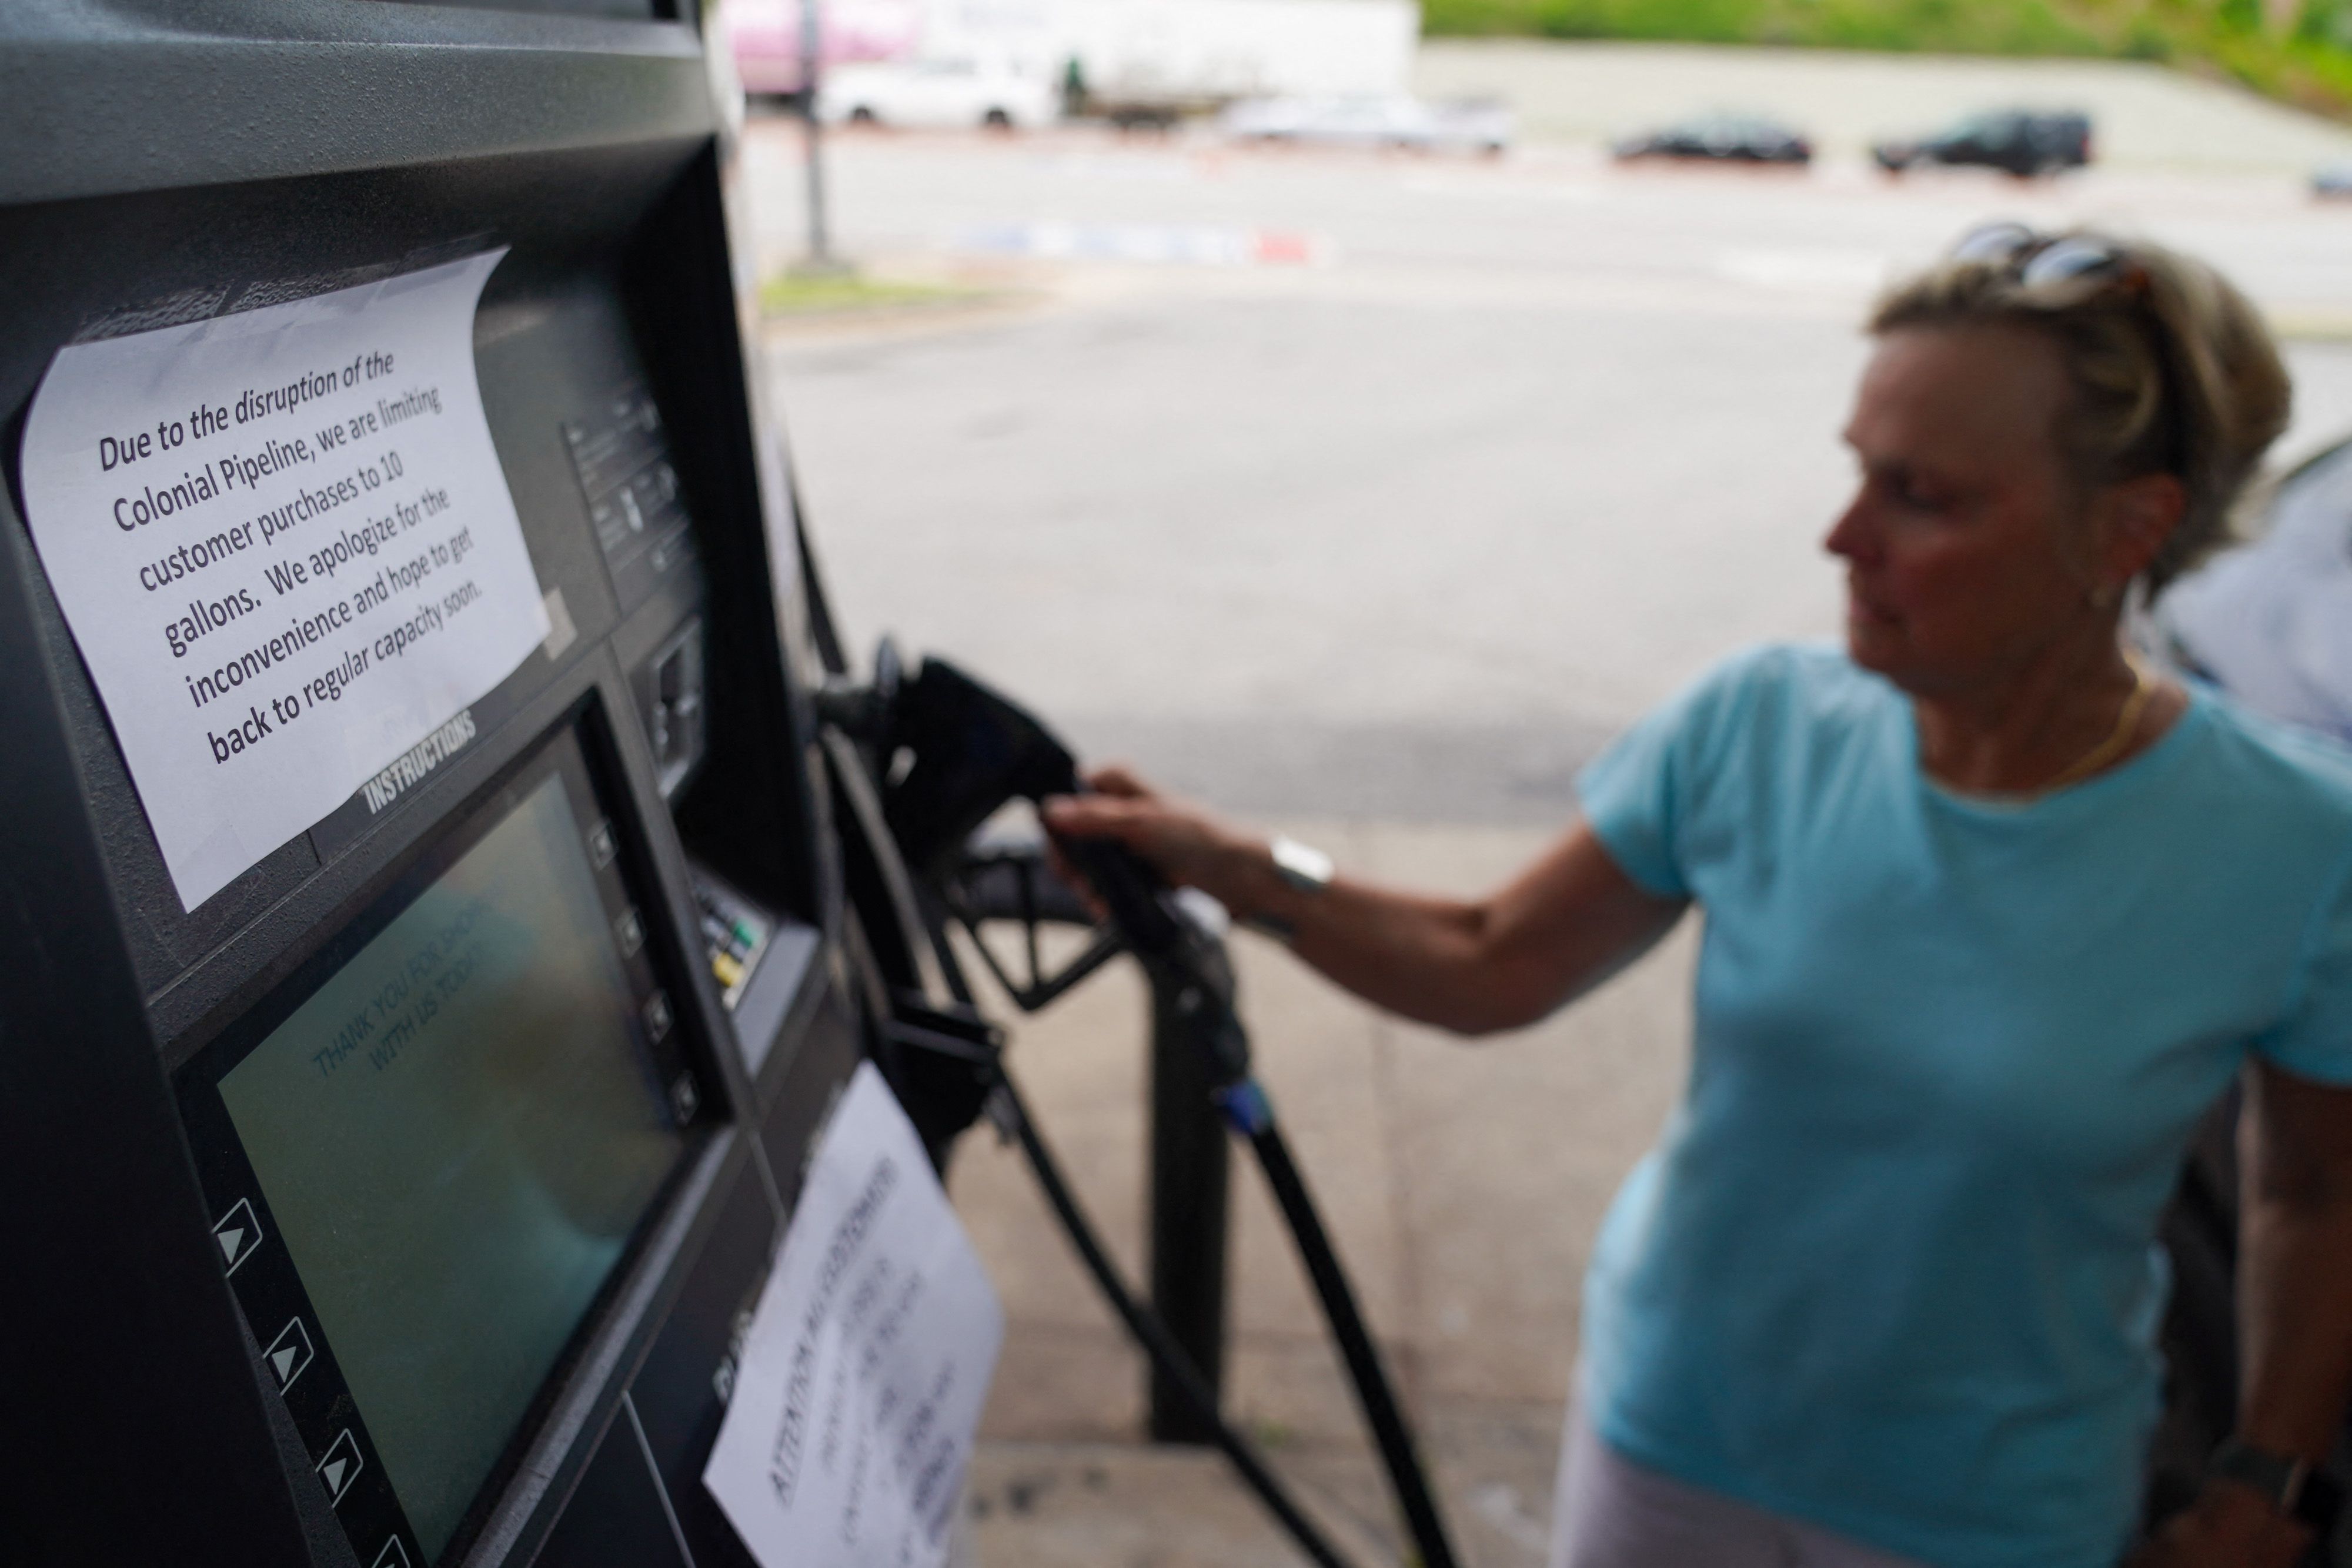 Signs to limit the puchase of gas from customers are seen on gas pumps at a Marathon gas station on May 11, 2021, in Smyrna, Georgia. 